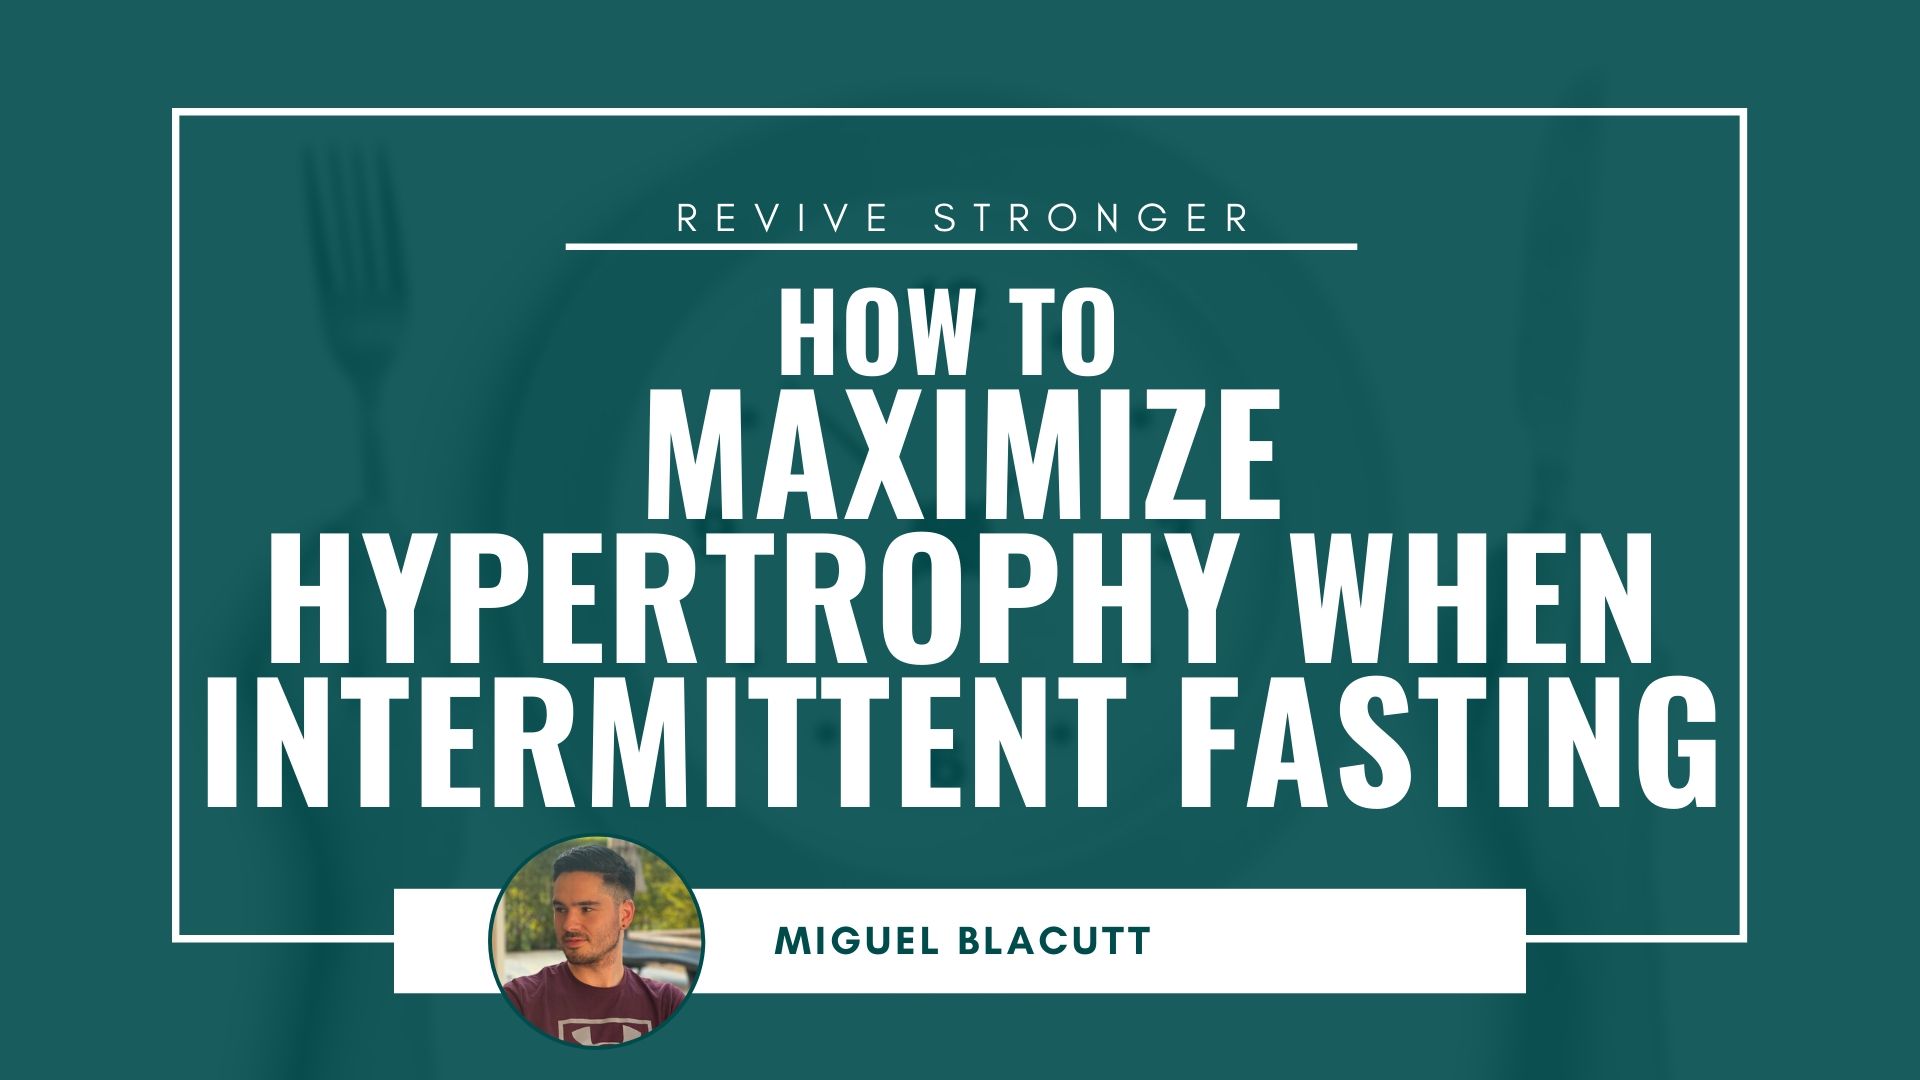 How to Maximize Hypertrophy when Intermittent Fasting - Miguel Blacutt